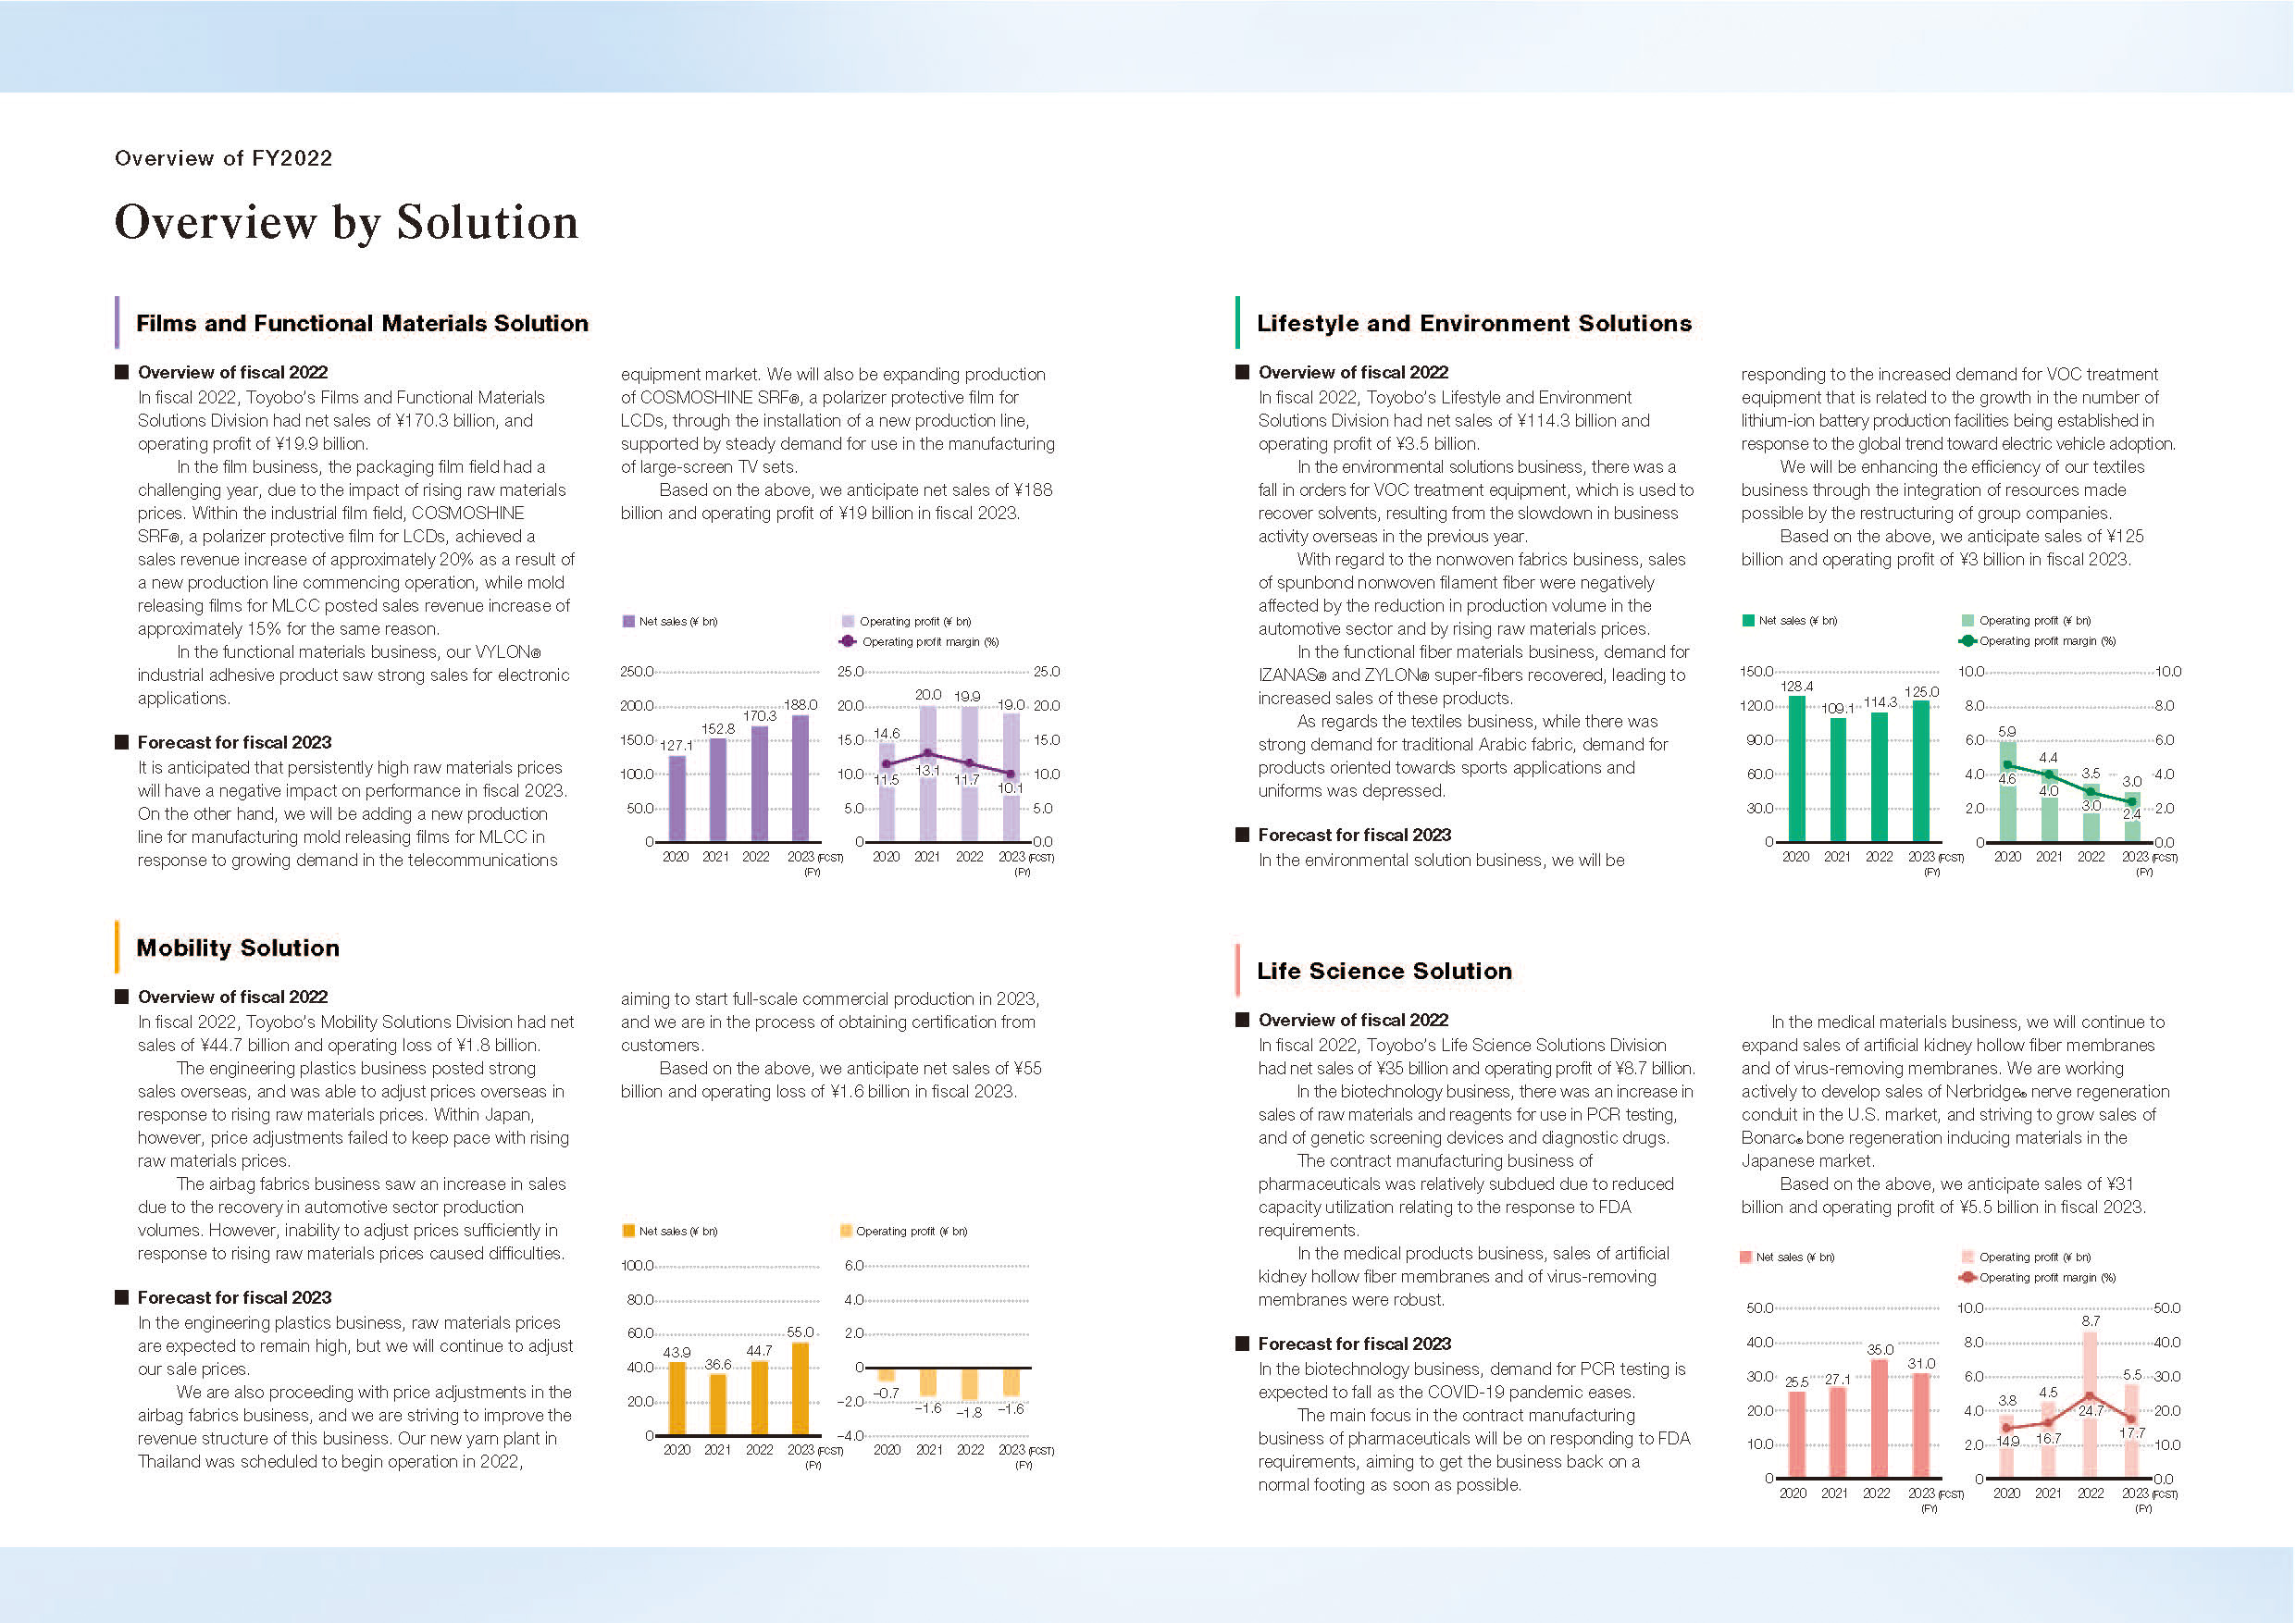 Overview by Solution Business in the Integrate Report 2022 (353KB)